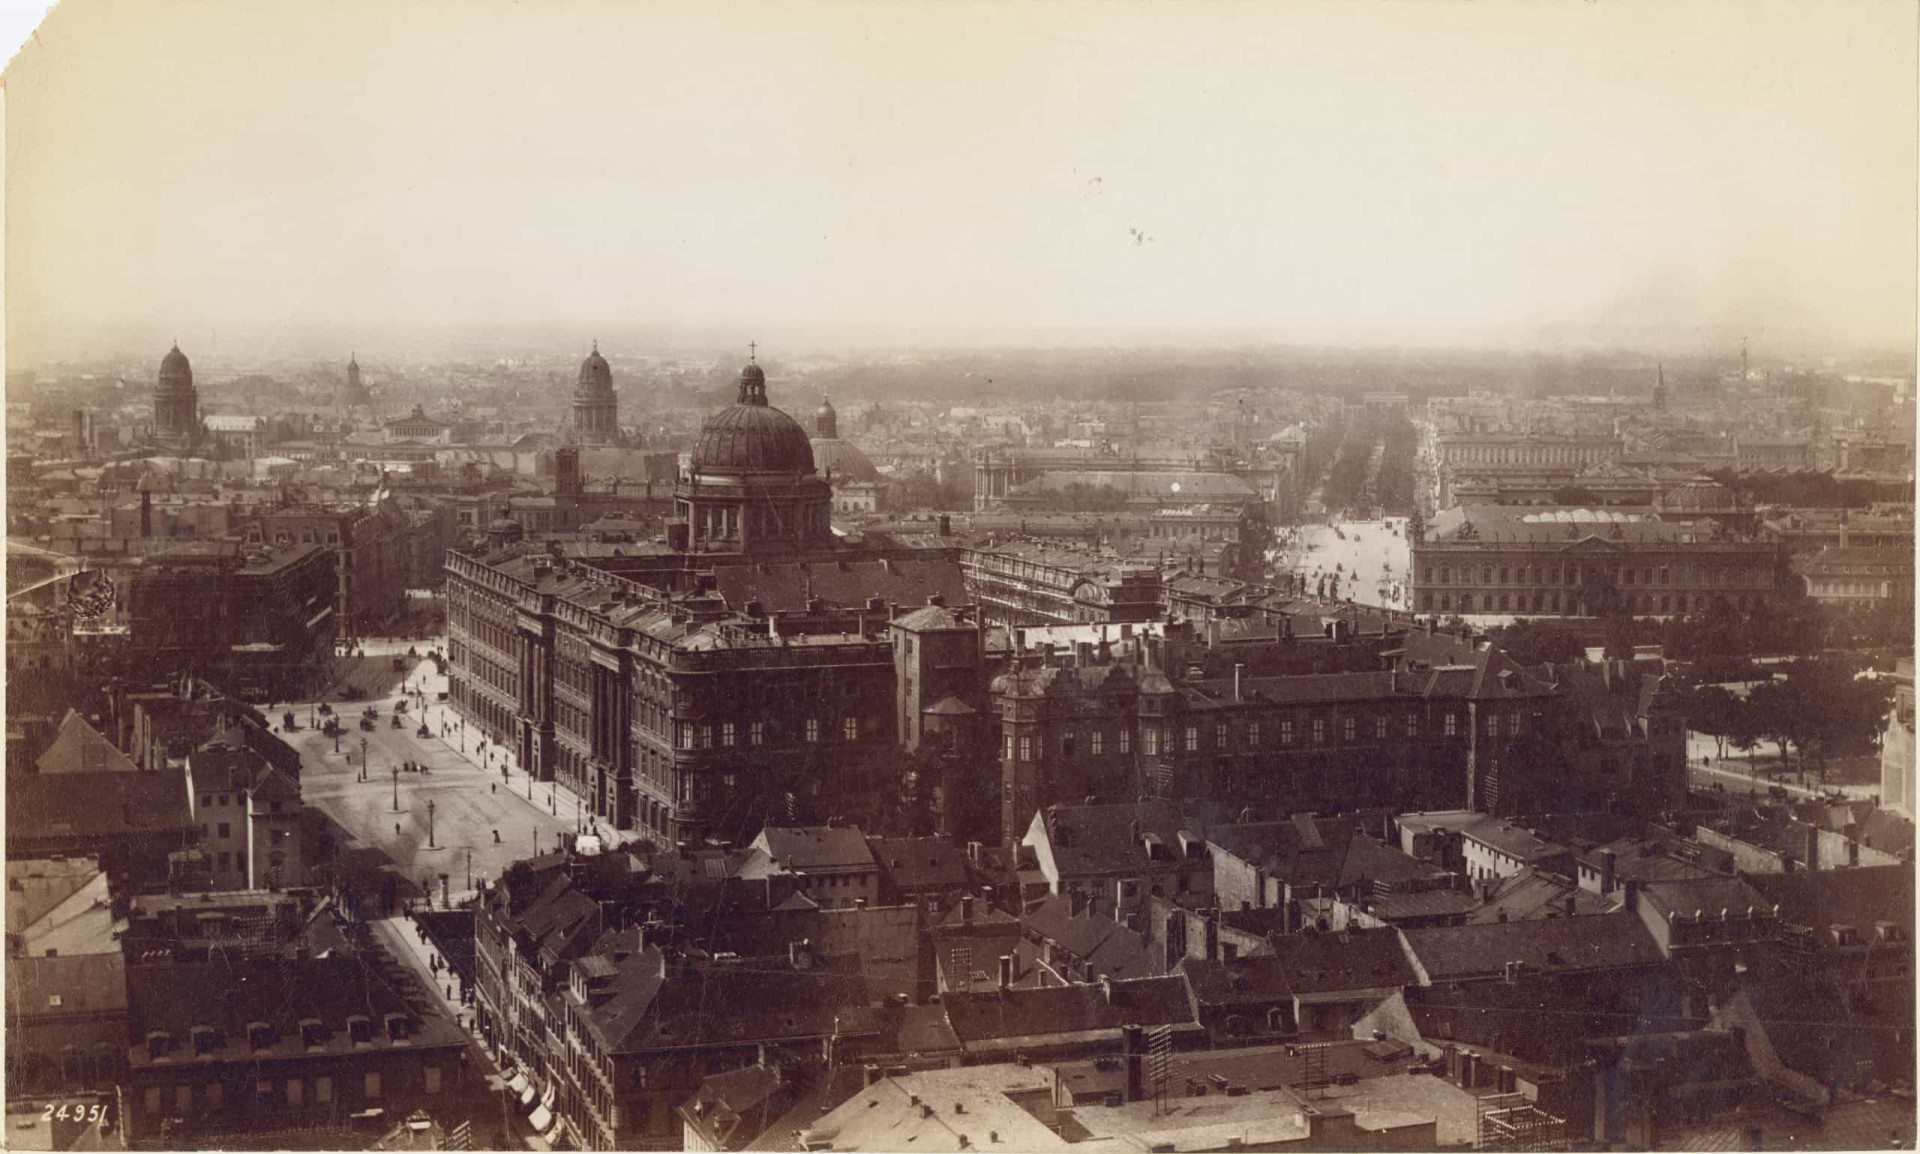 A view of the Berlin cityscape, featuring the Unter Den Linden and Stadtschloss. The photo was taken in 1870.